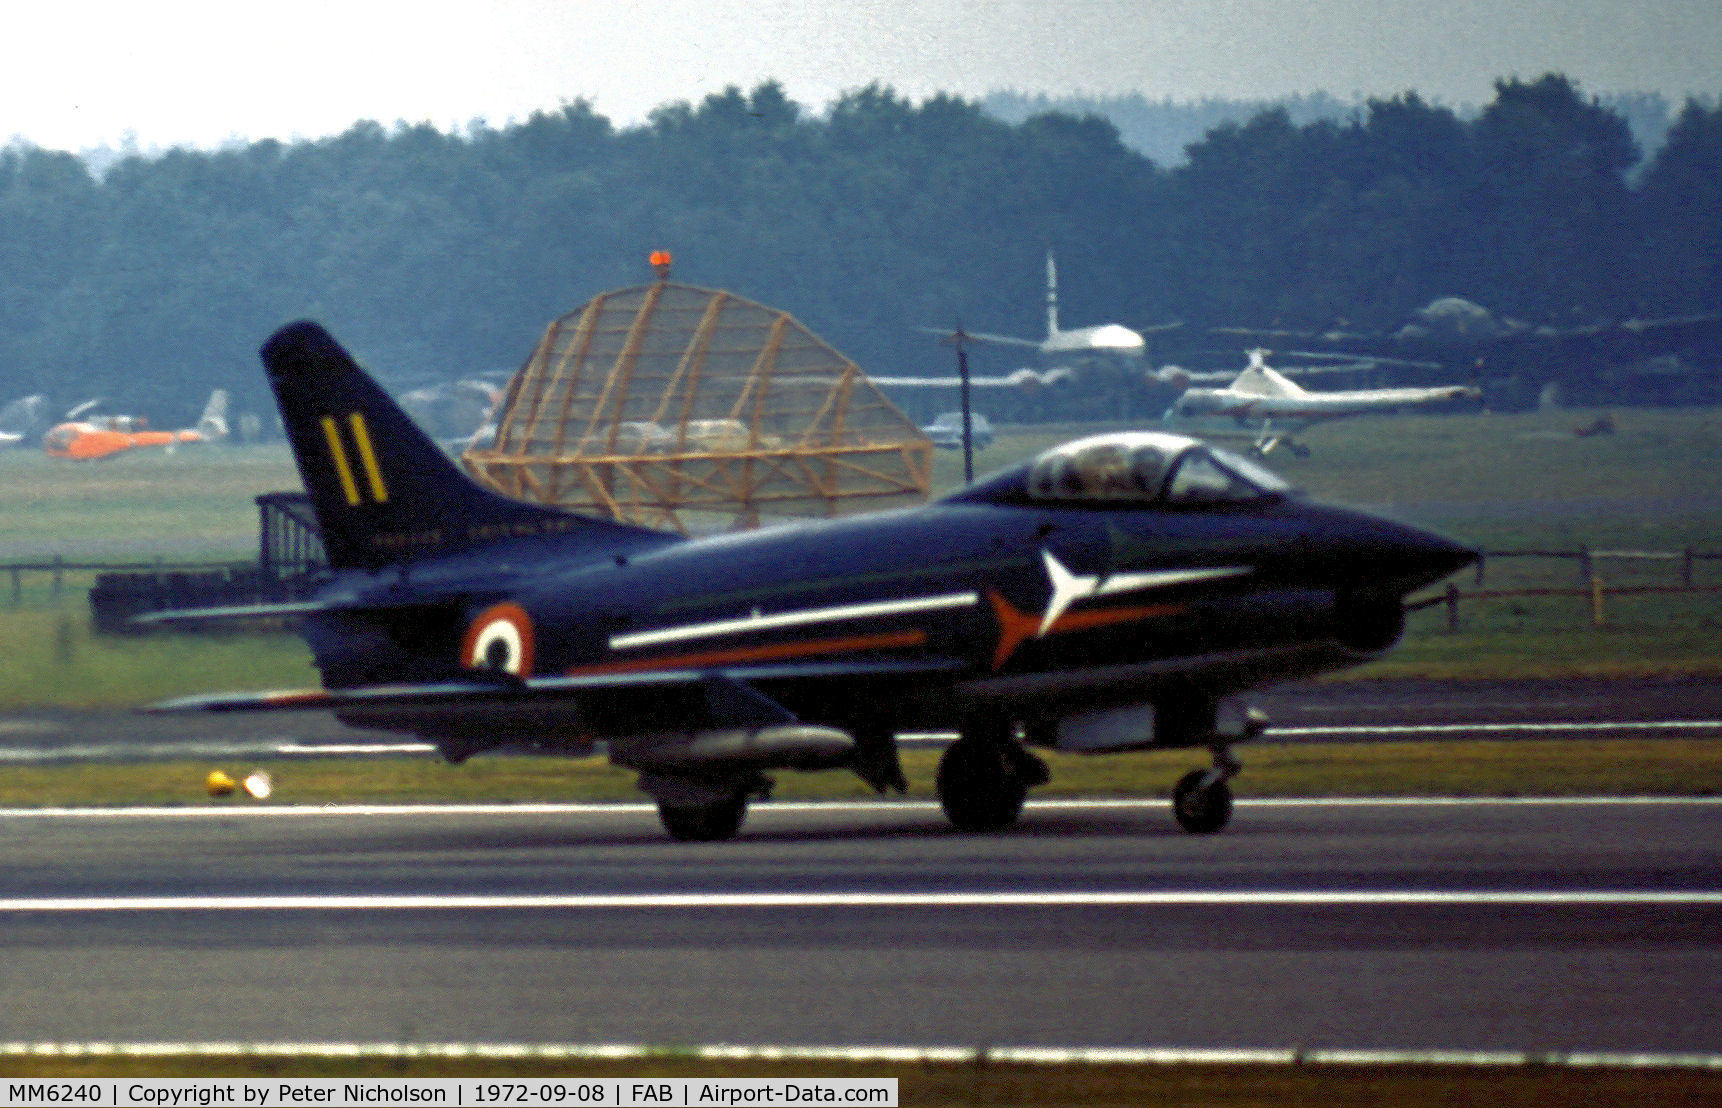 MM6240, Fiat G-91PAN C/N 6, Fiat G-91PAN number 11 of the Italian Air Force's Frecce Tricolori flight demonstration team in action at the1972 Farnborough Airshow.